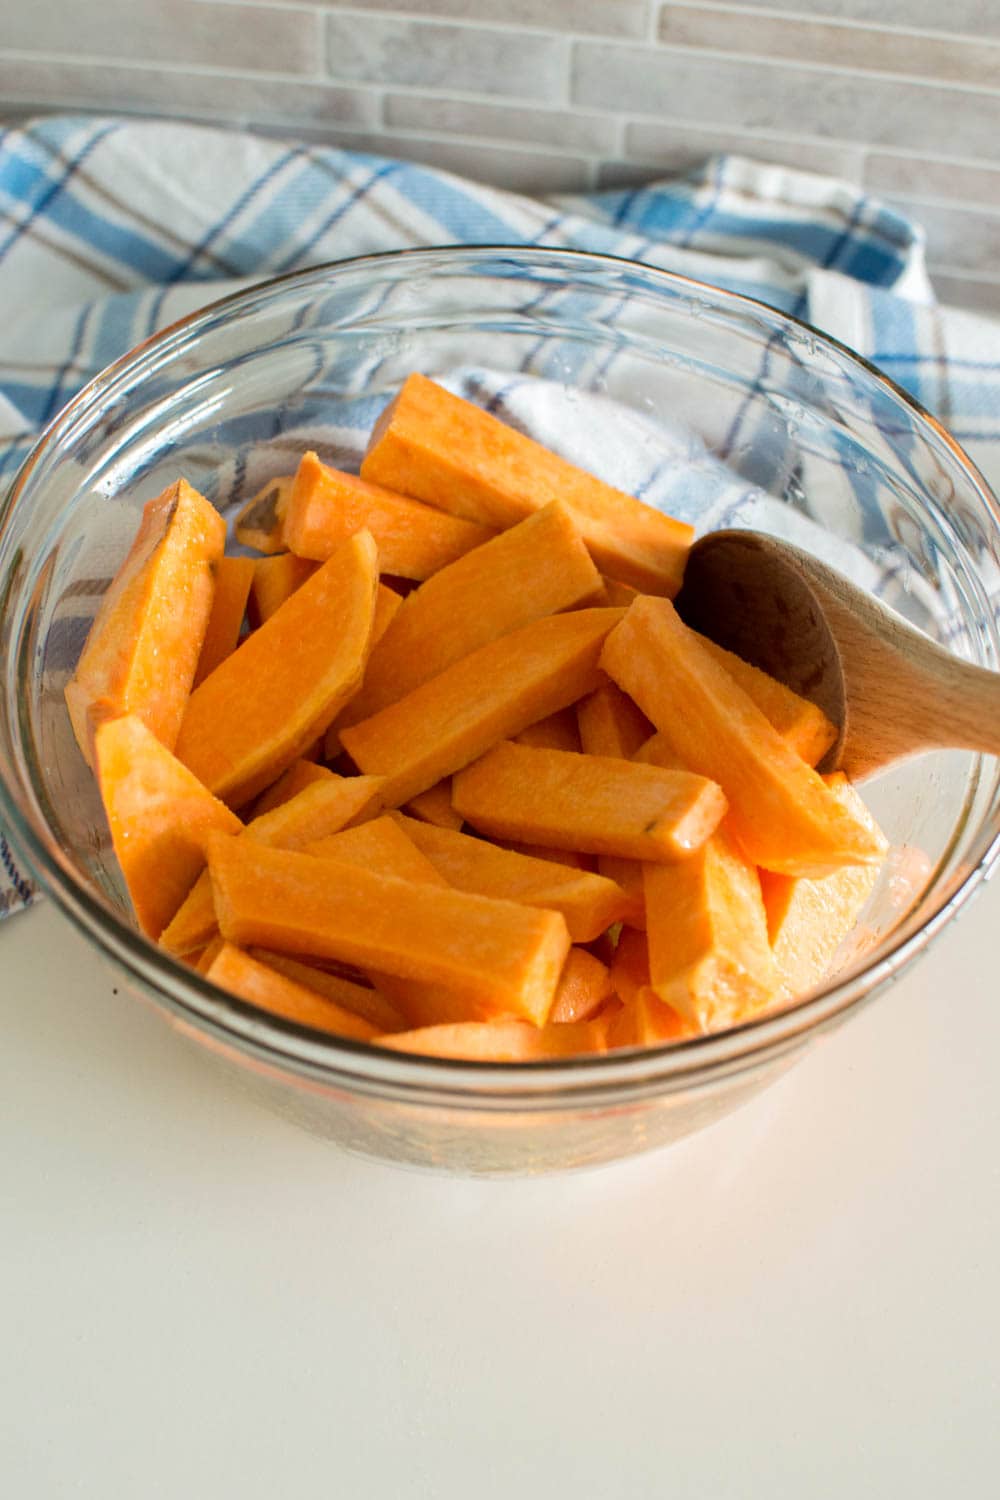 Slices of sweet potato in a glass bowl, coated with extra virgin olive oil and salt